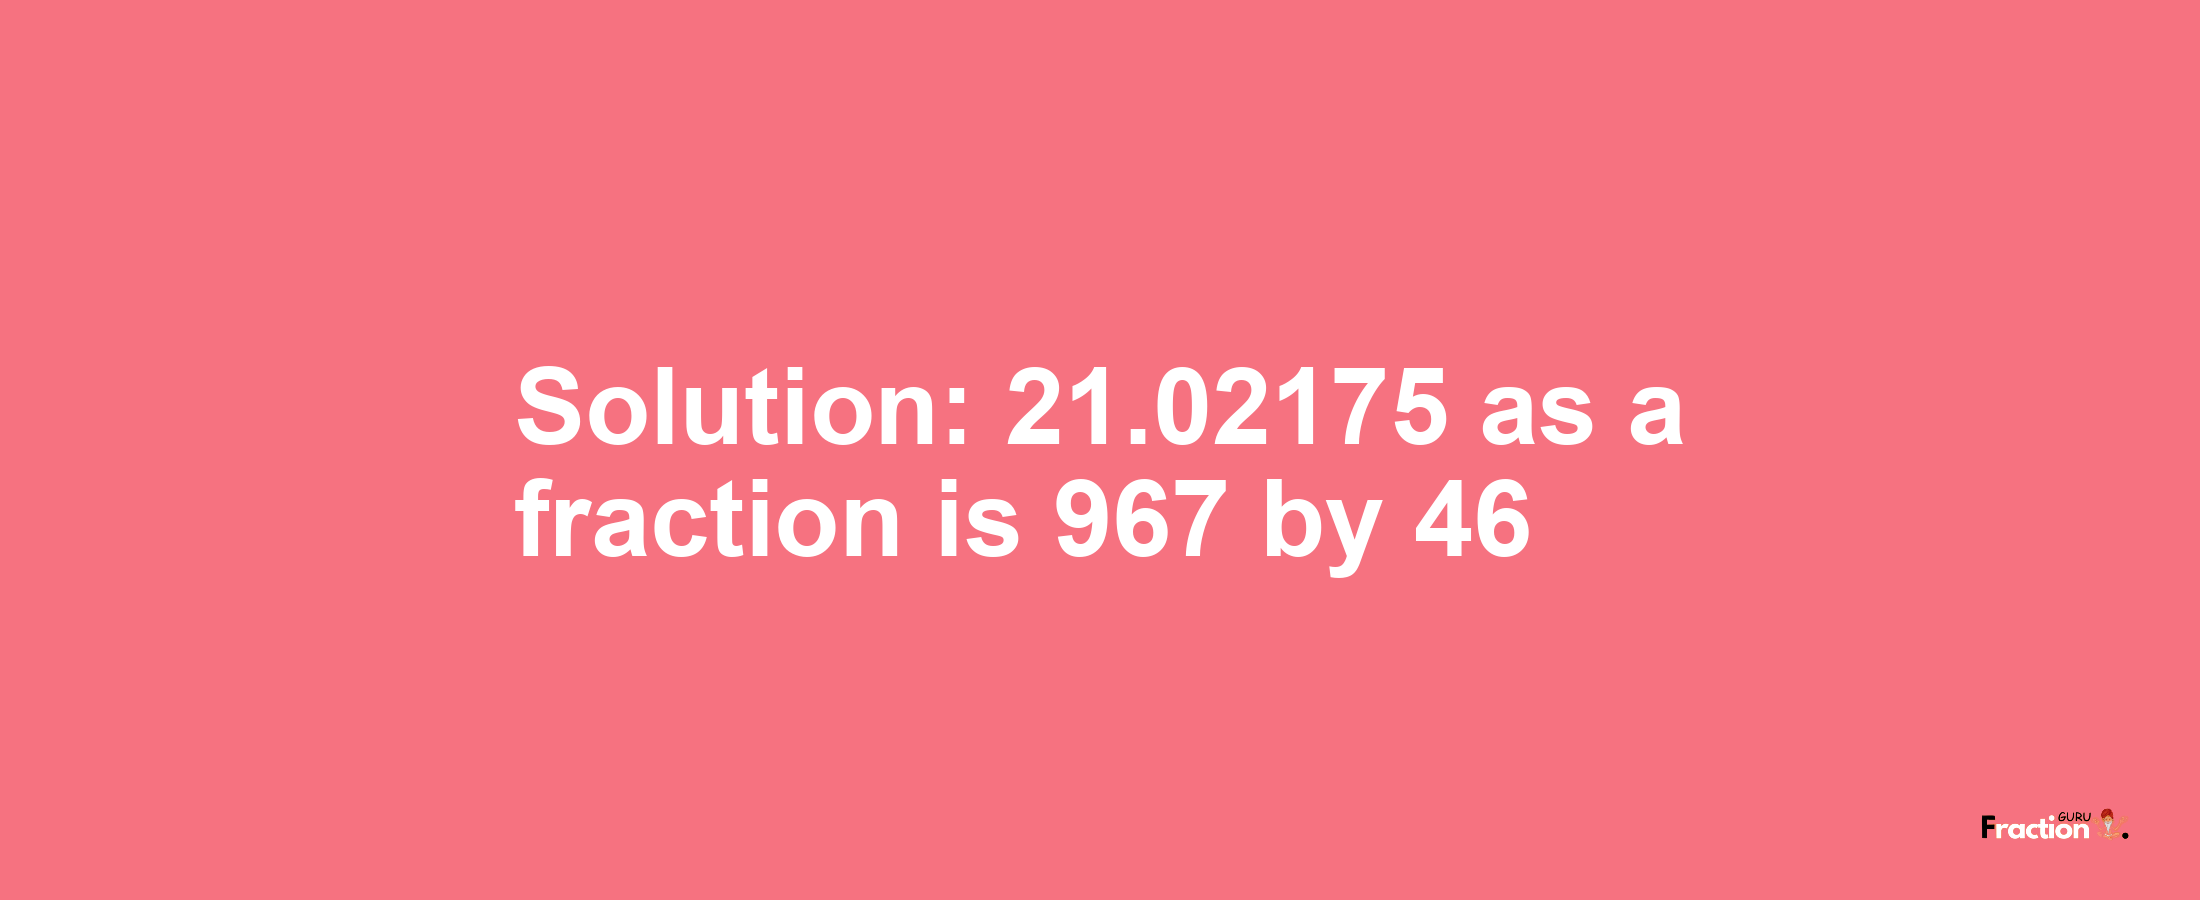 Solution:21.02175 as a fraction is 967/46